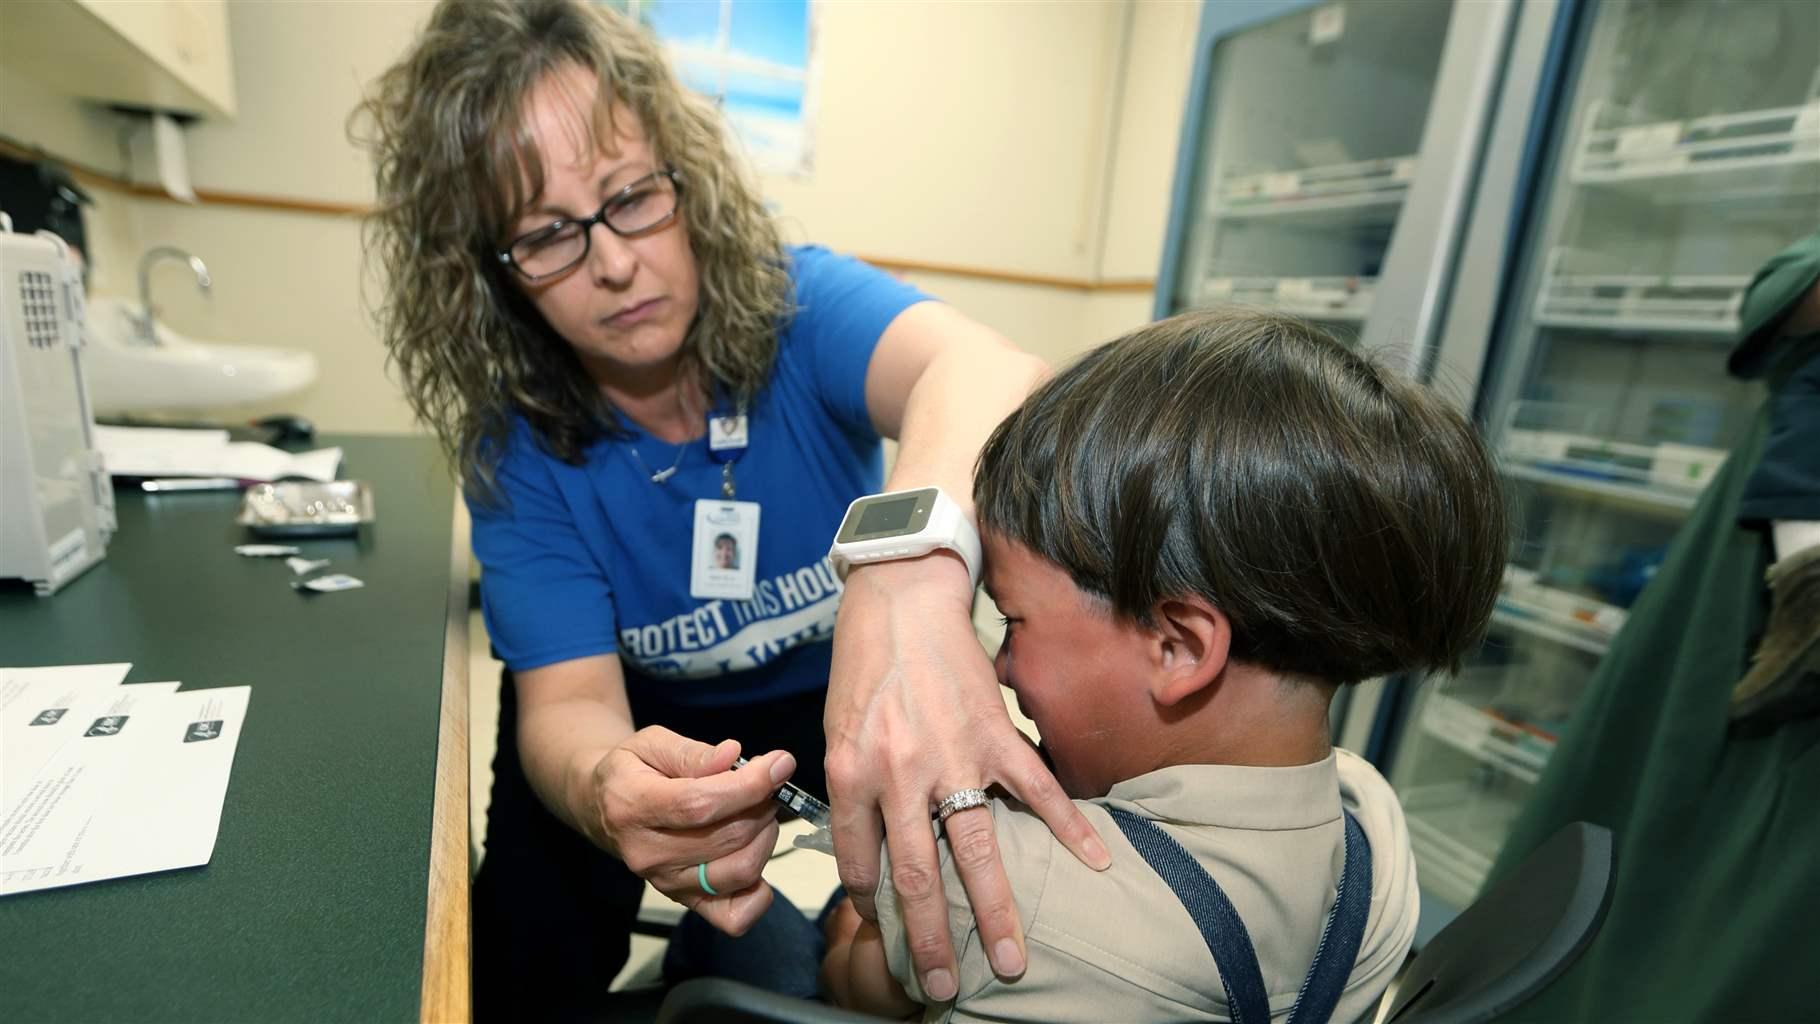 A registered nurse and immunization outreach coordinator with the Knox County Health Department, administers a vaccination to a kid at the facility in Mount Vernon, Ohio, Friday May 17, 2019. In a report issued Wednesday, Nov. 23, 2022, the World Health Organization and the U.S. Centers for Disease Control and Prevention say measles immunization has dropped significantly since the coronavirus pandemic began, resulting in a record high of nearly 40 million children missing a vaccine dose last year. (AP Photo/Paul Vernon, File)